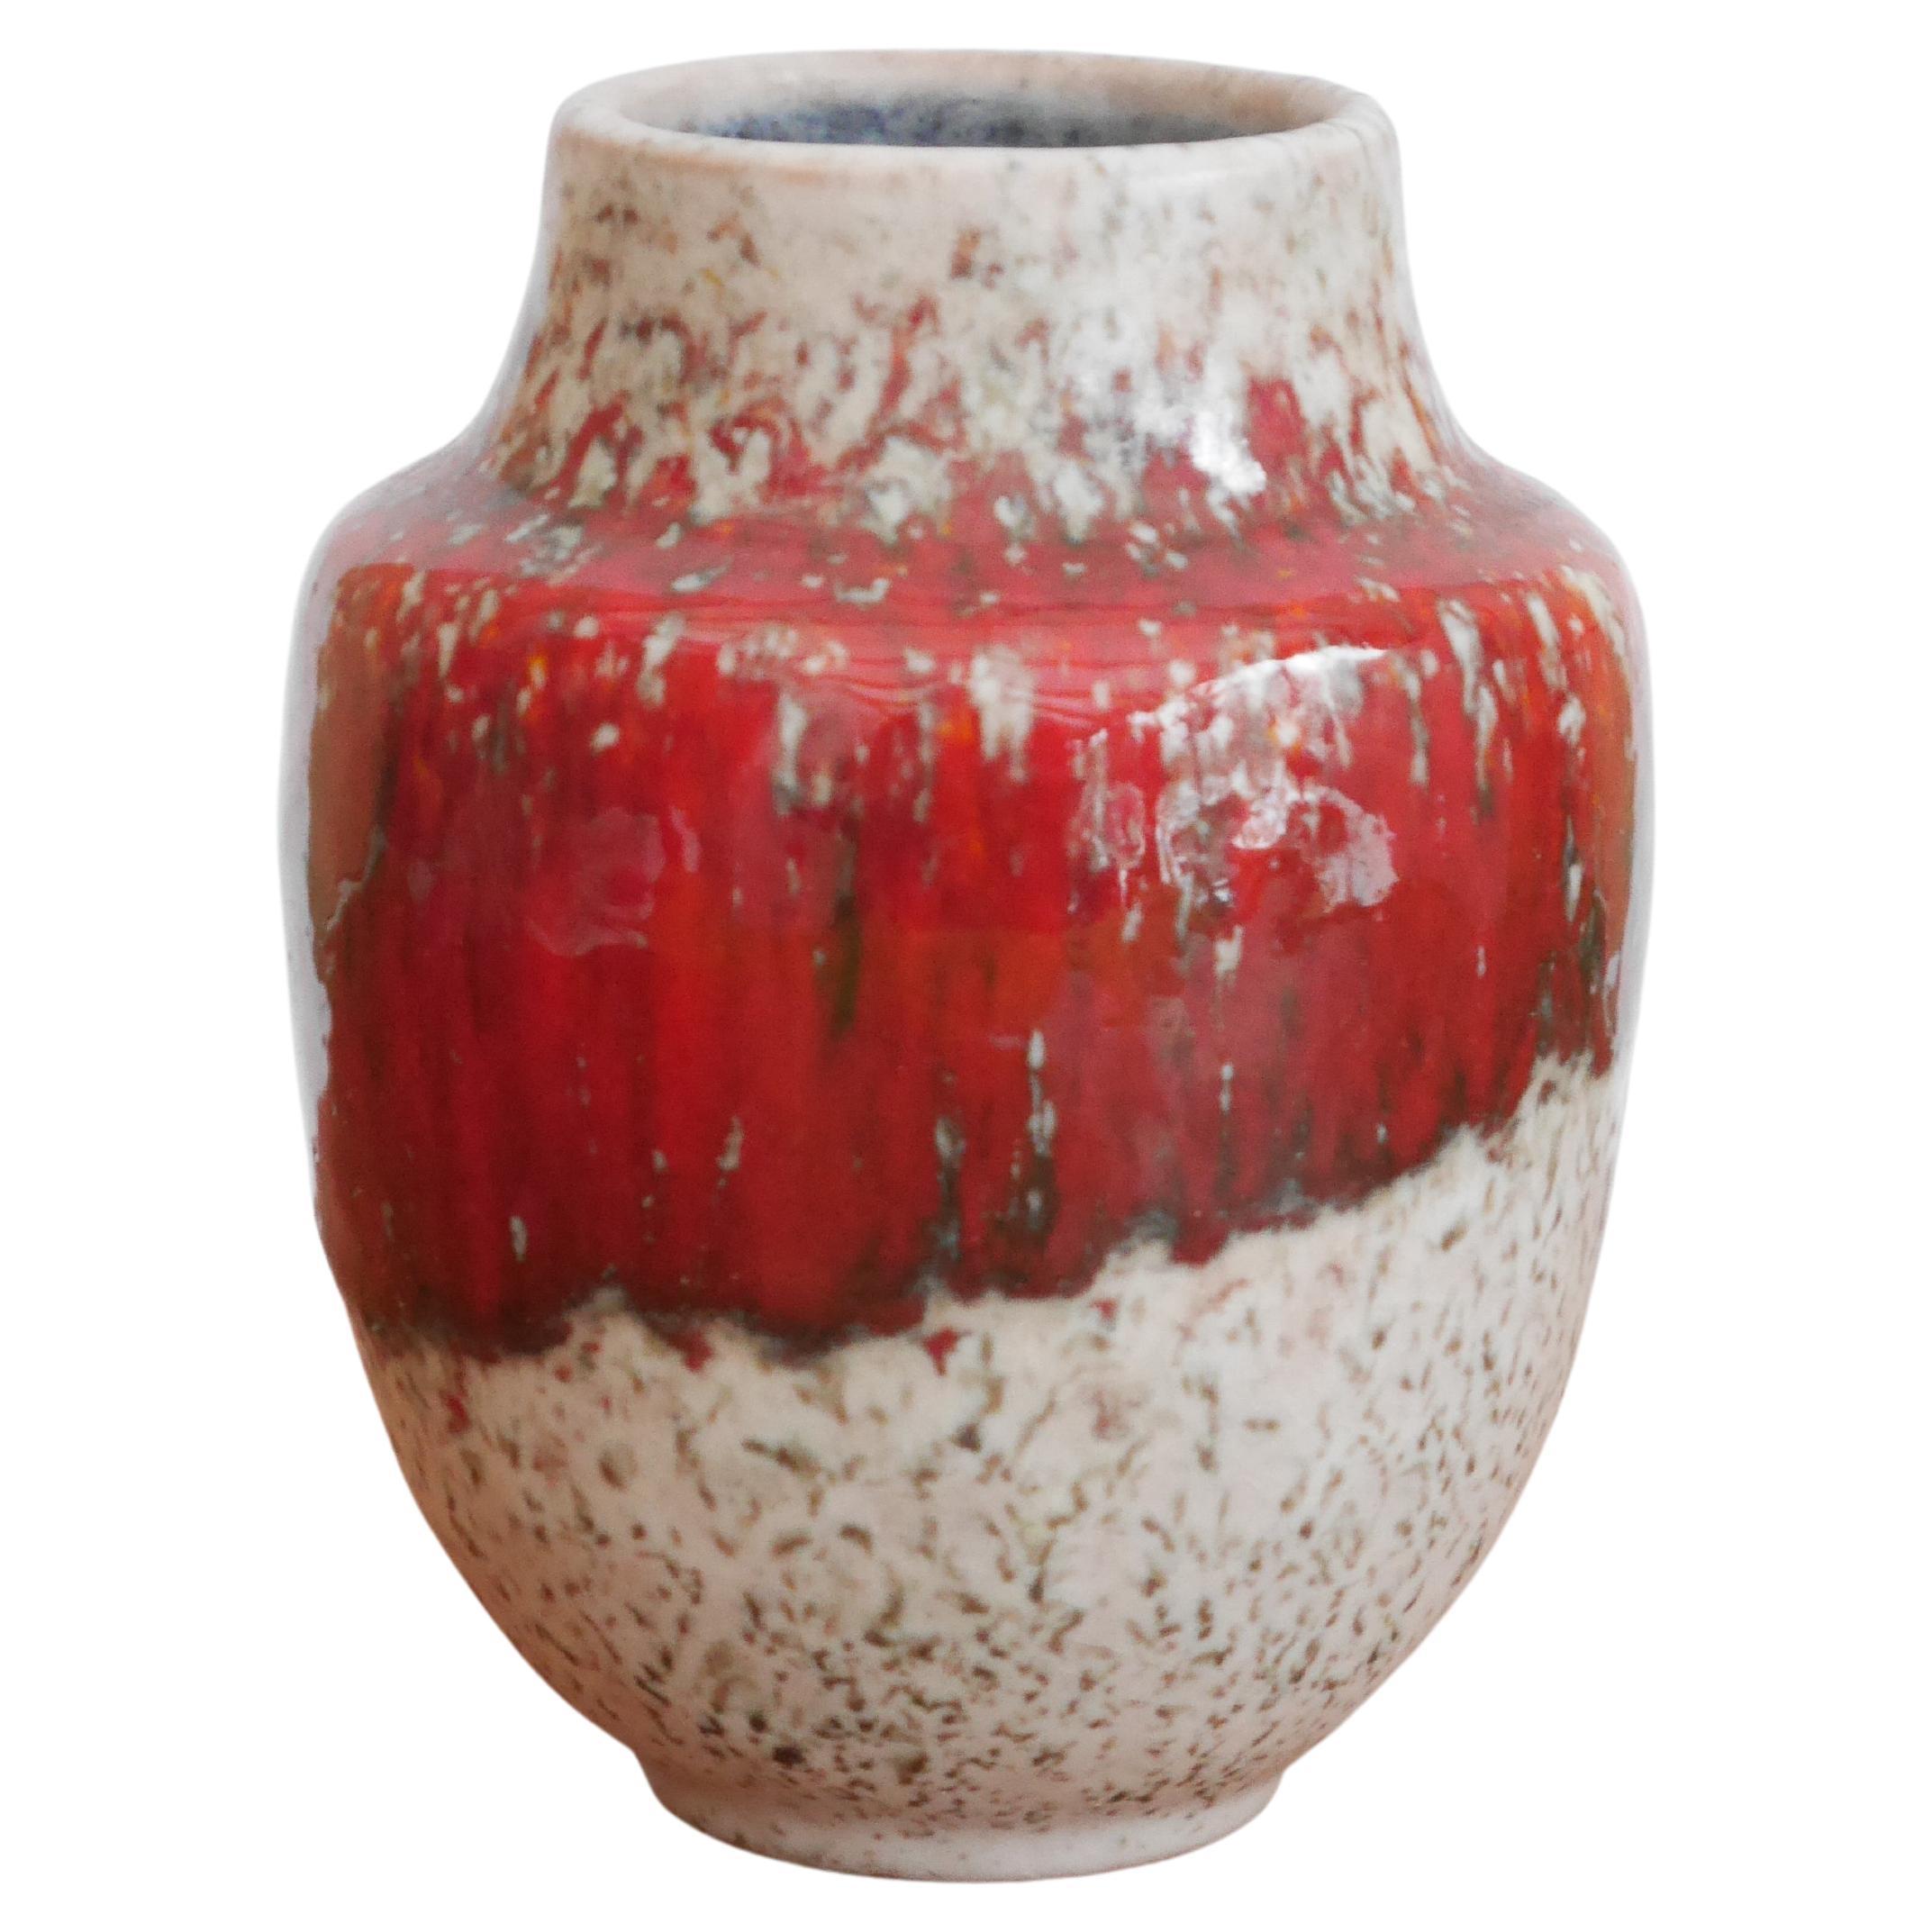 Retro Red Vase from Karlsruhe, 1960s Germany